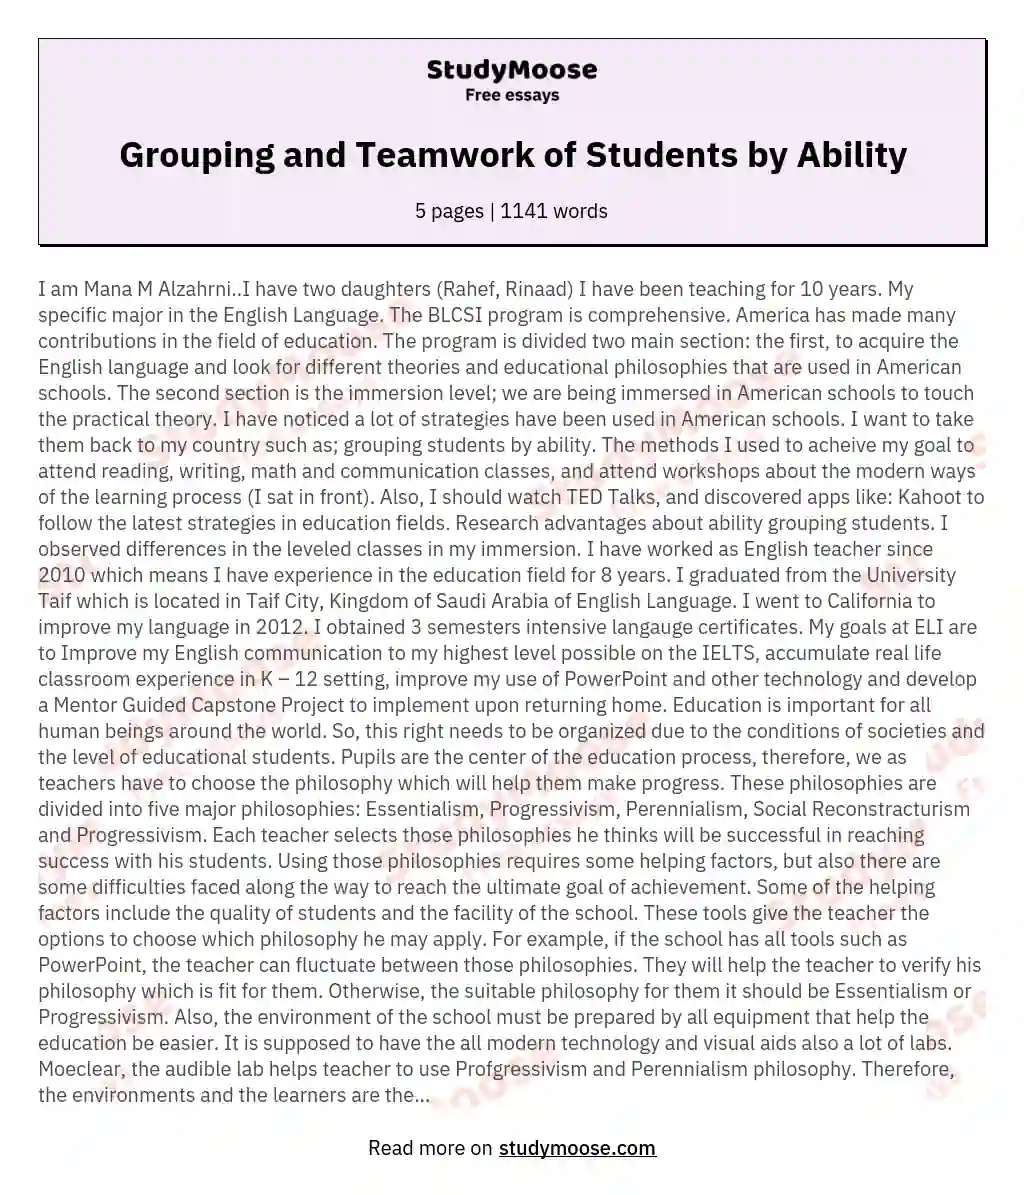 Grouping and Teamwork of Students by Ability essay